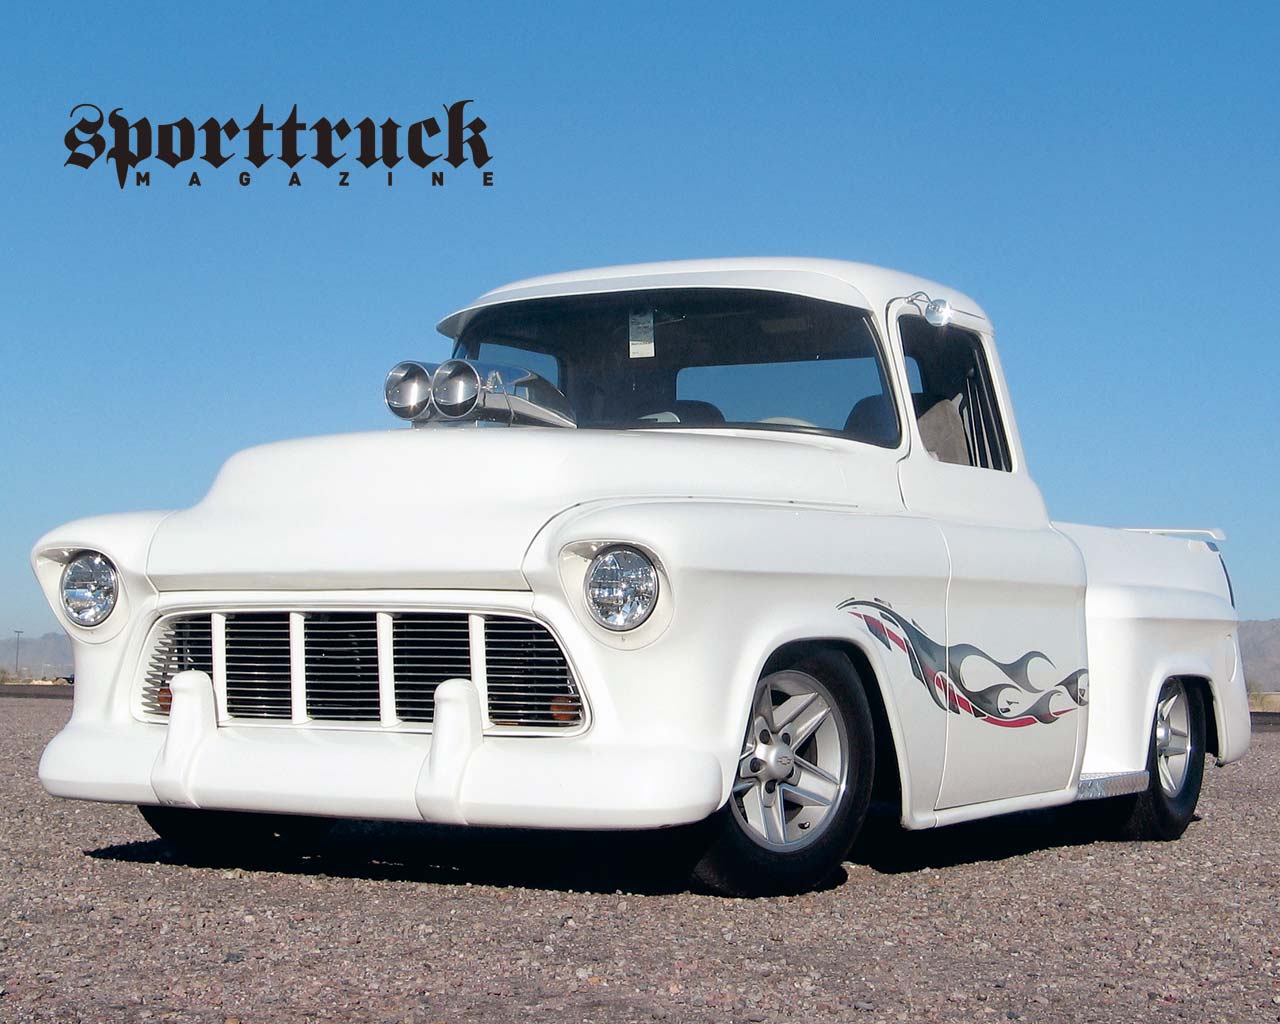 Here Is Chevy Truck Wallpaper And Photos Gallery